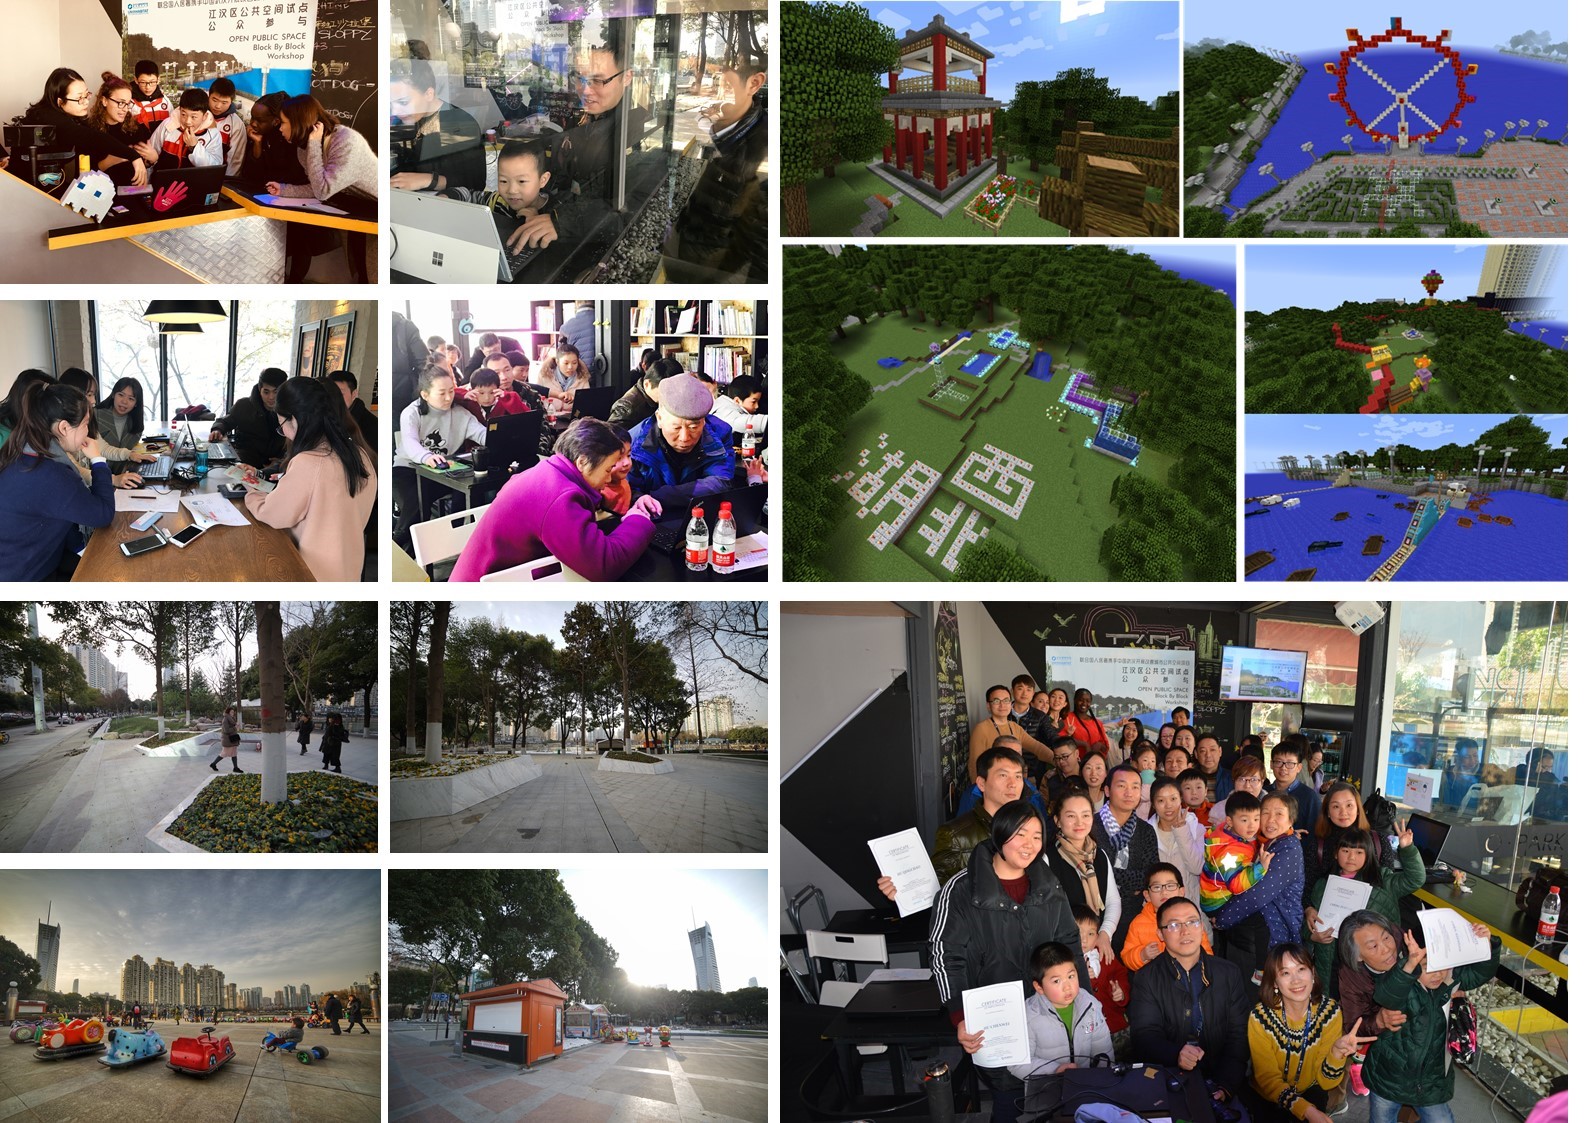 People-oriented Participatory Planning: Successful Optimization of Public Space in High-density Urban Area - &quot;Public Space Assessment of Wuhan Jianghan District (Pilot)&quot; and &quot;BLOCK BY BLOCK - Minecraft Workshop&quot;